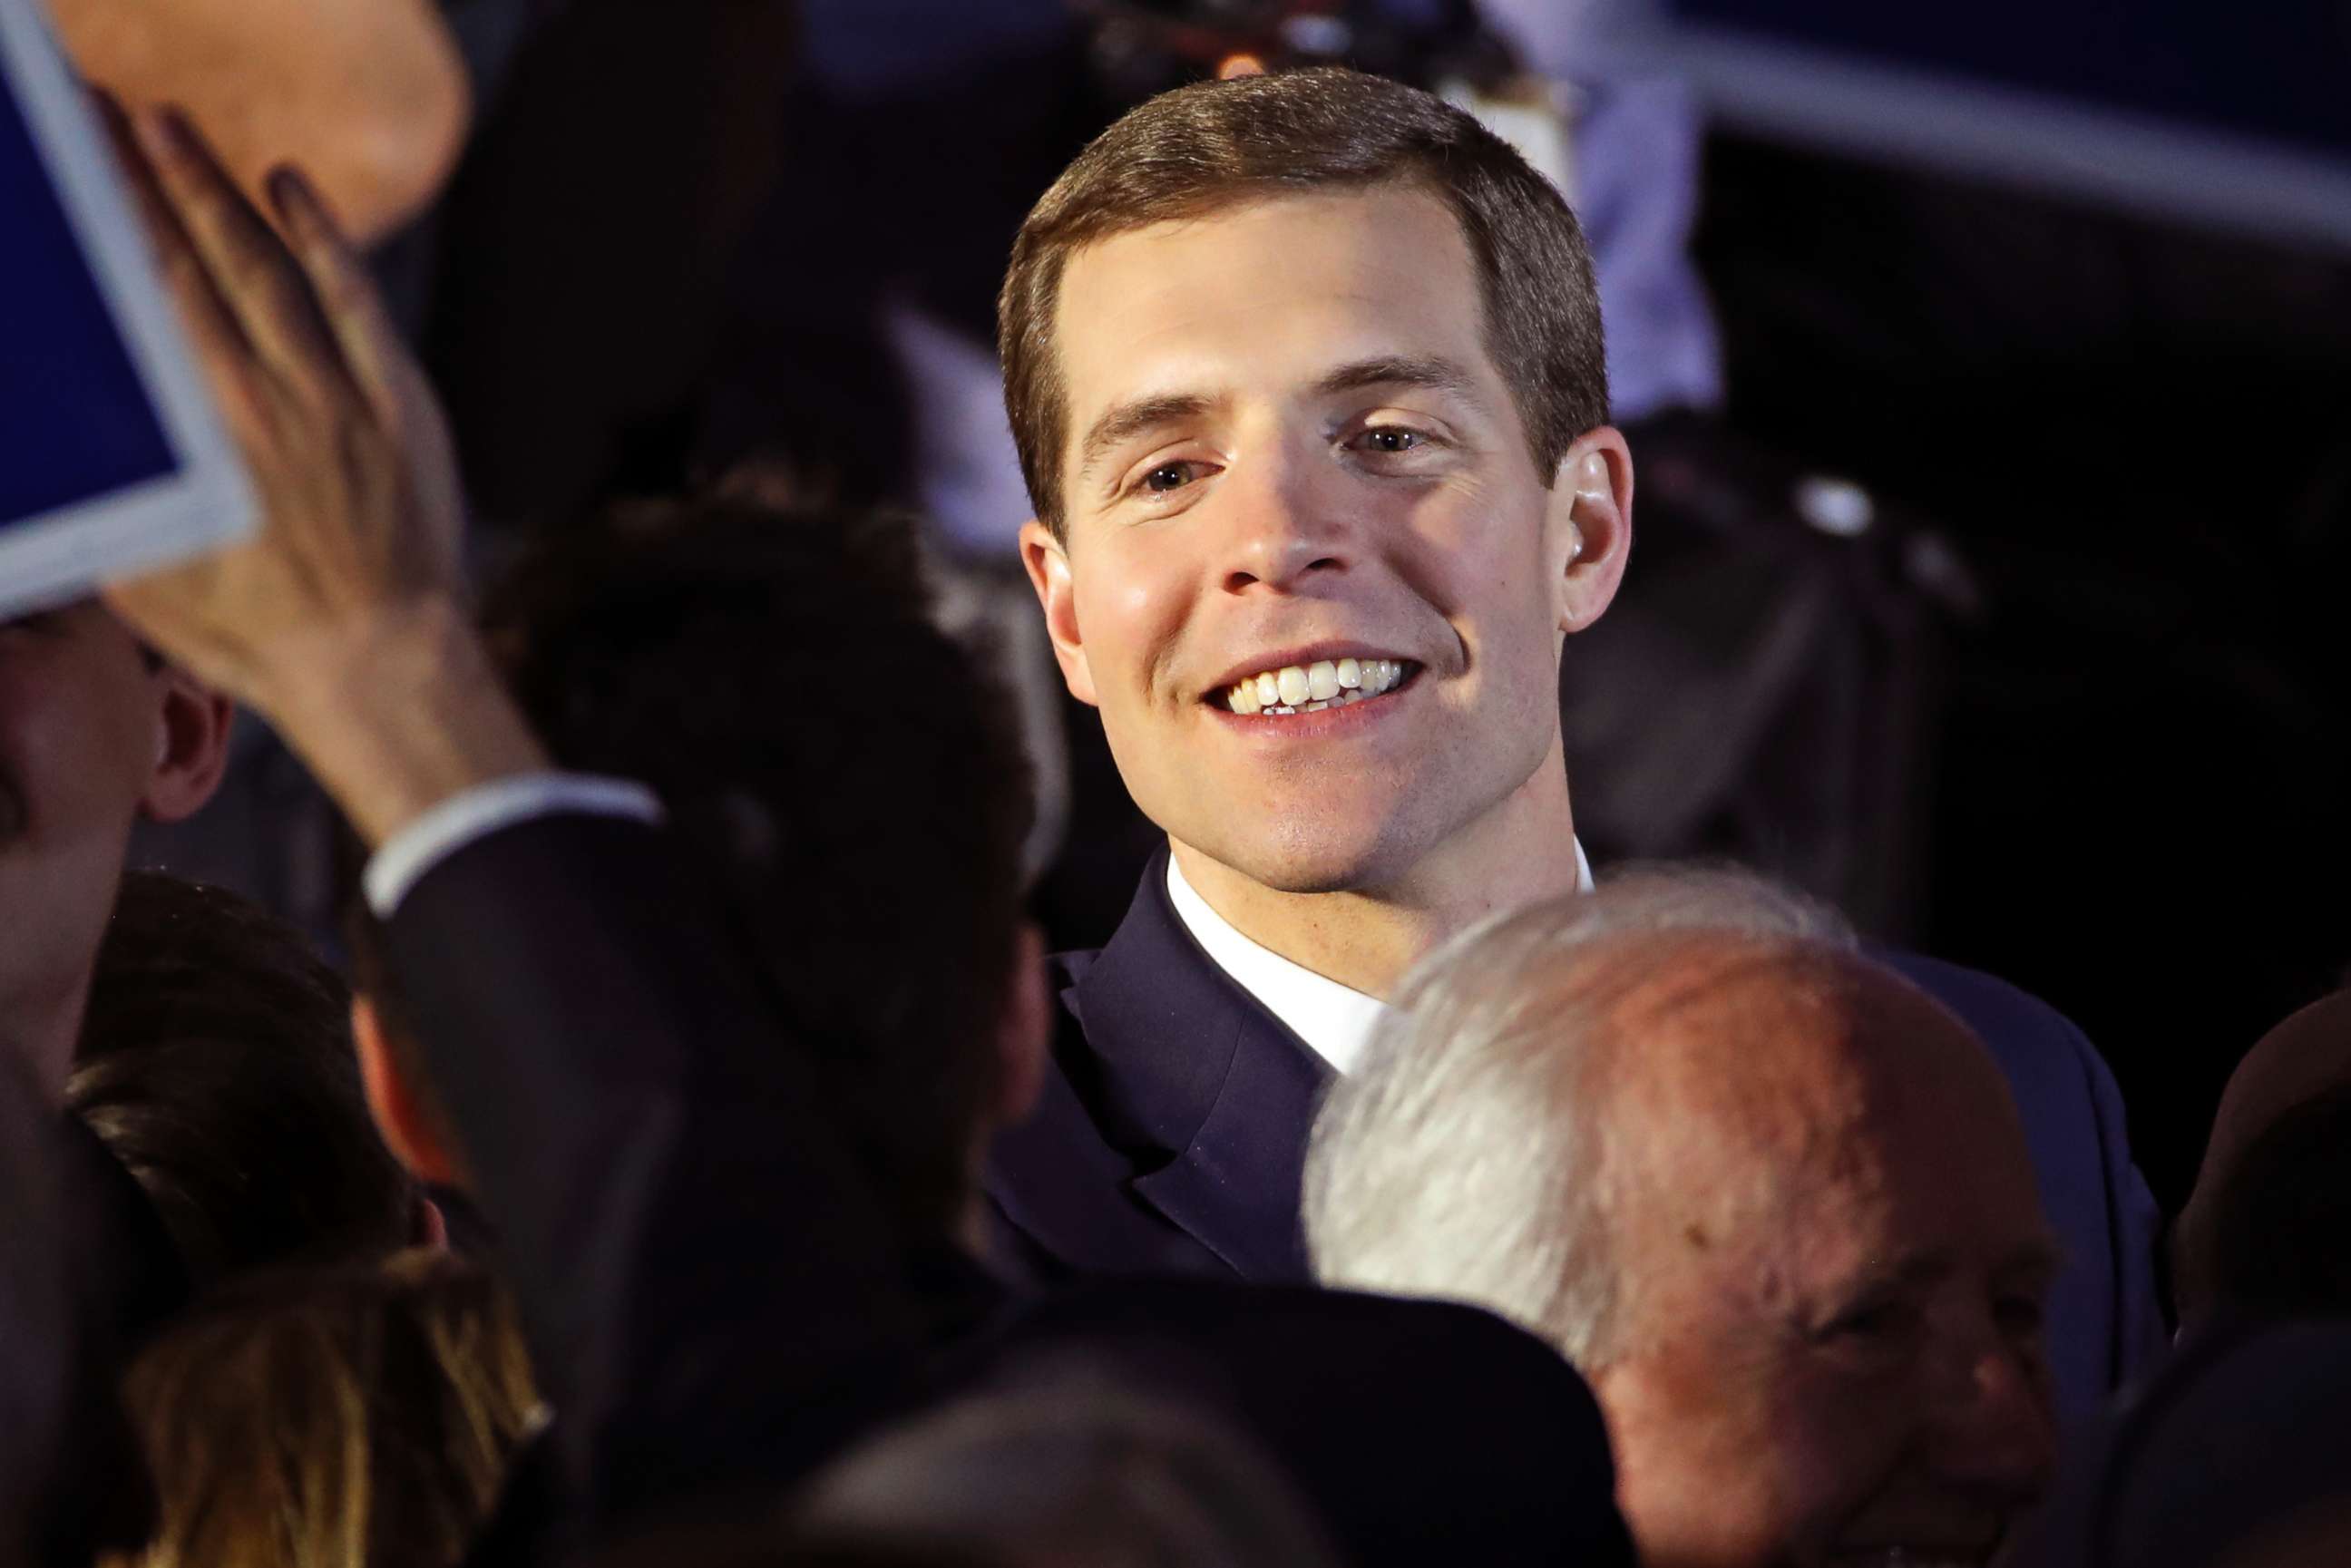 PHOTO: In this March 14, 2018, file photo, Conor Lamb, the Democratic candidate for the March 13 special election in Pennsylvania's 18th Congressional District, celebrates with his supporters at his election night party in Canonsburg, Pa. 